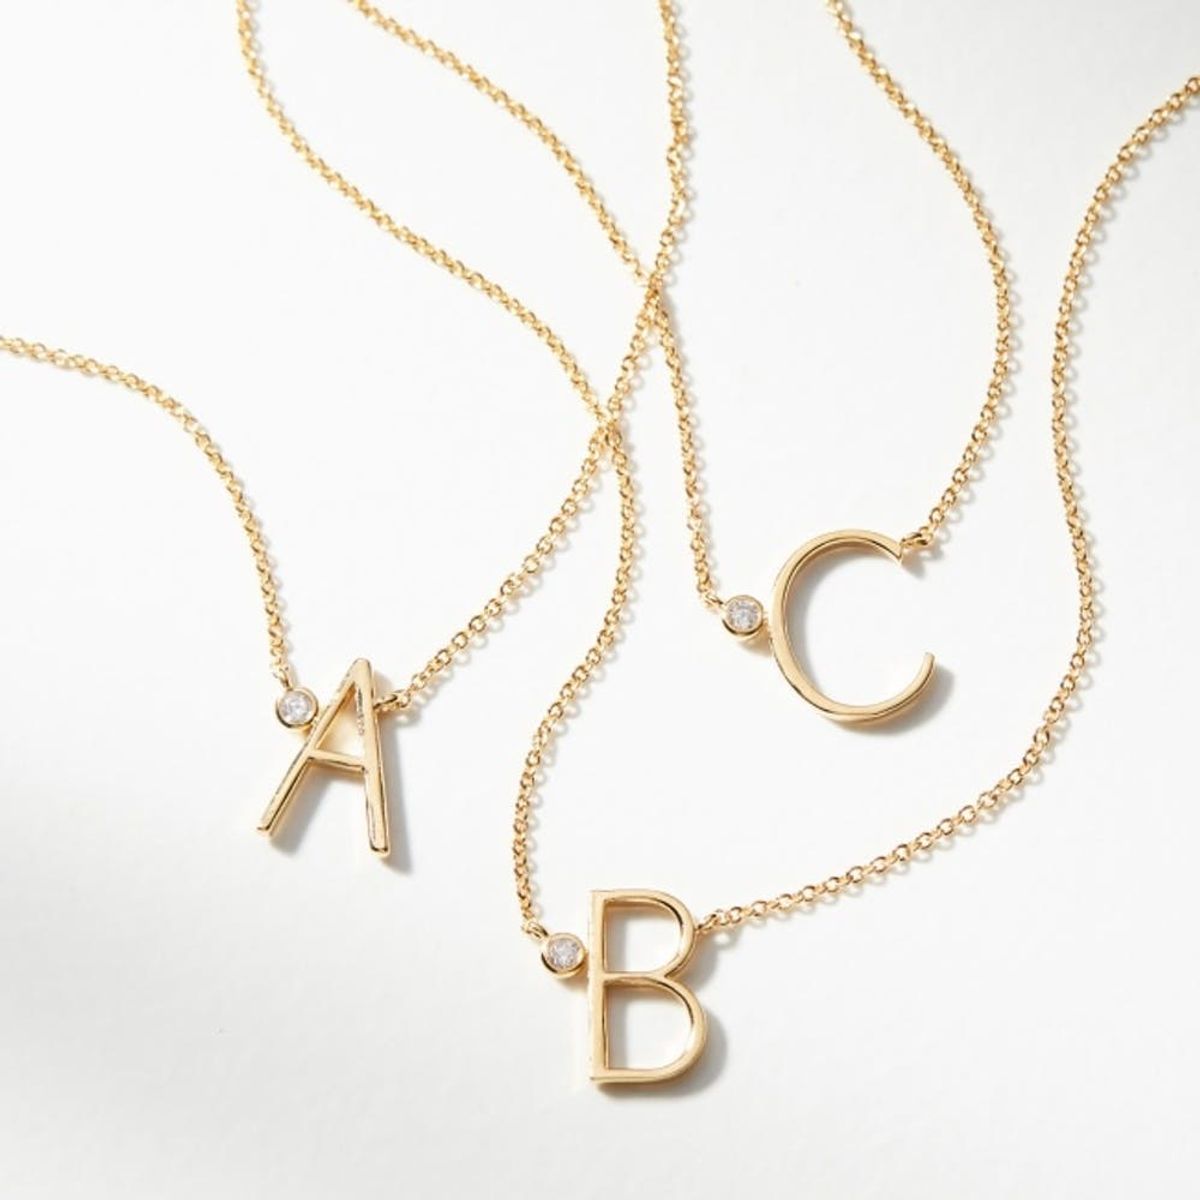 10 Must-Have Personalized Jewelry and Accessories Gifts from Anthropologie